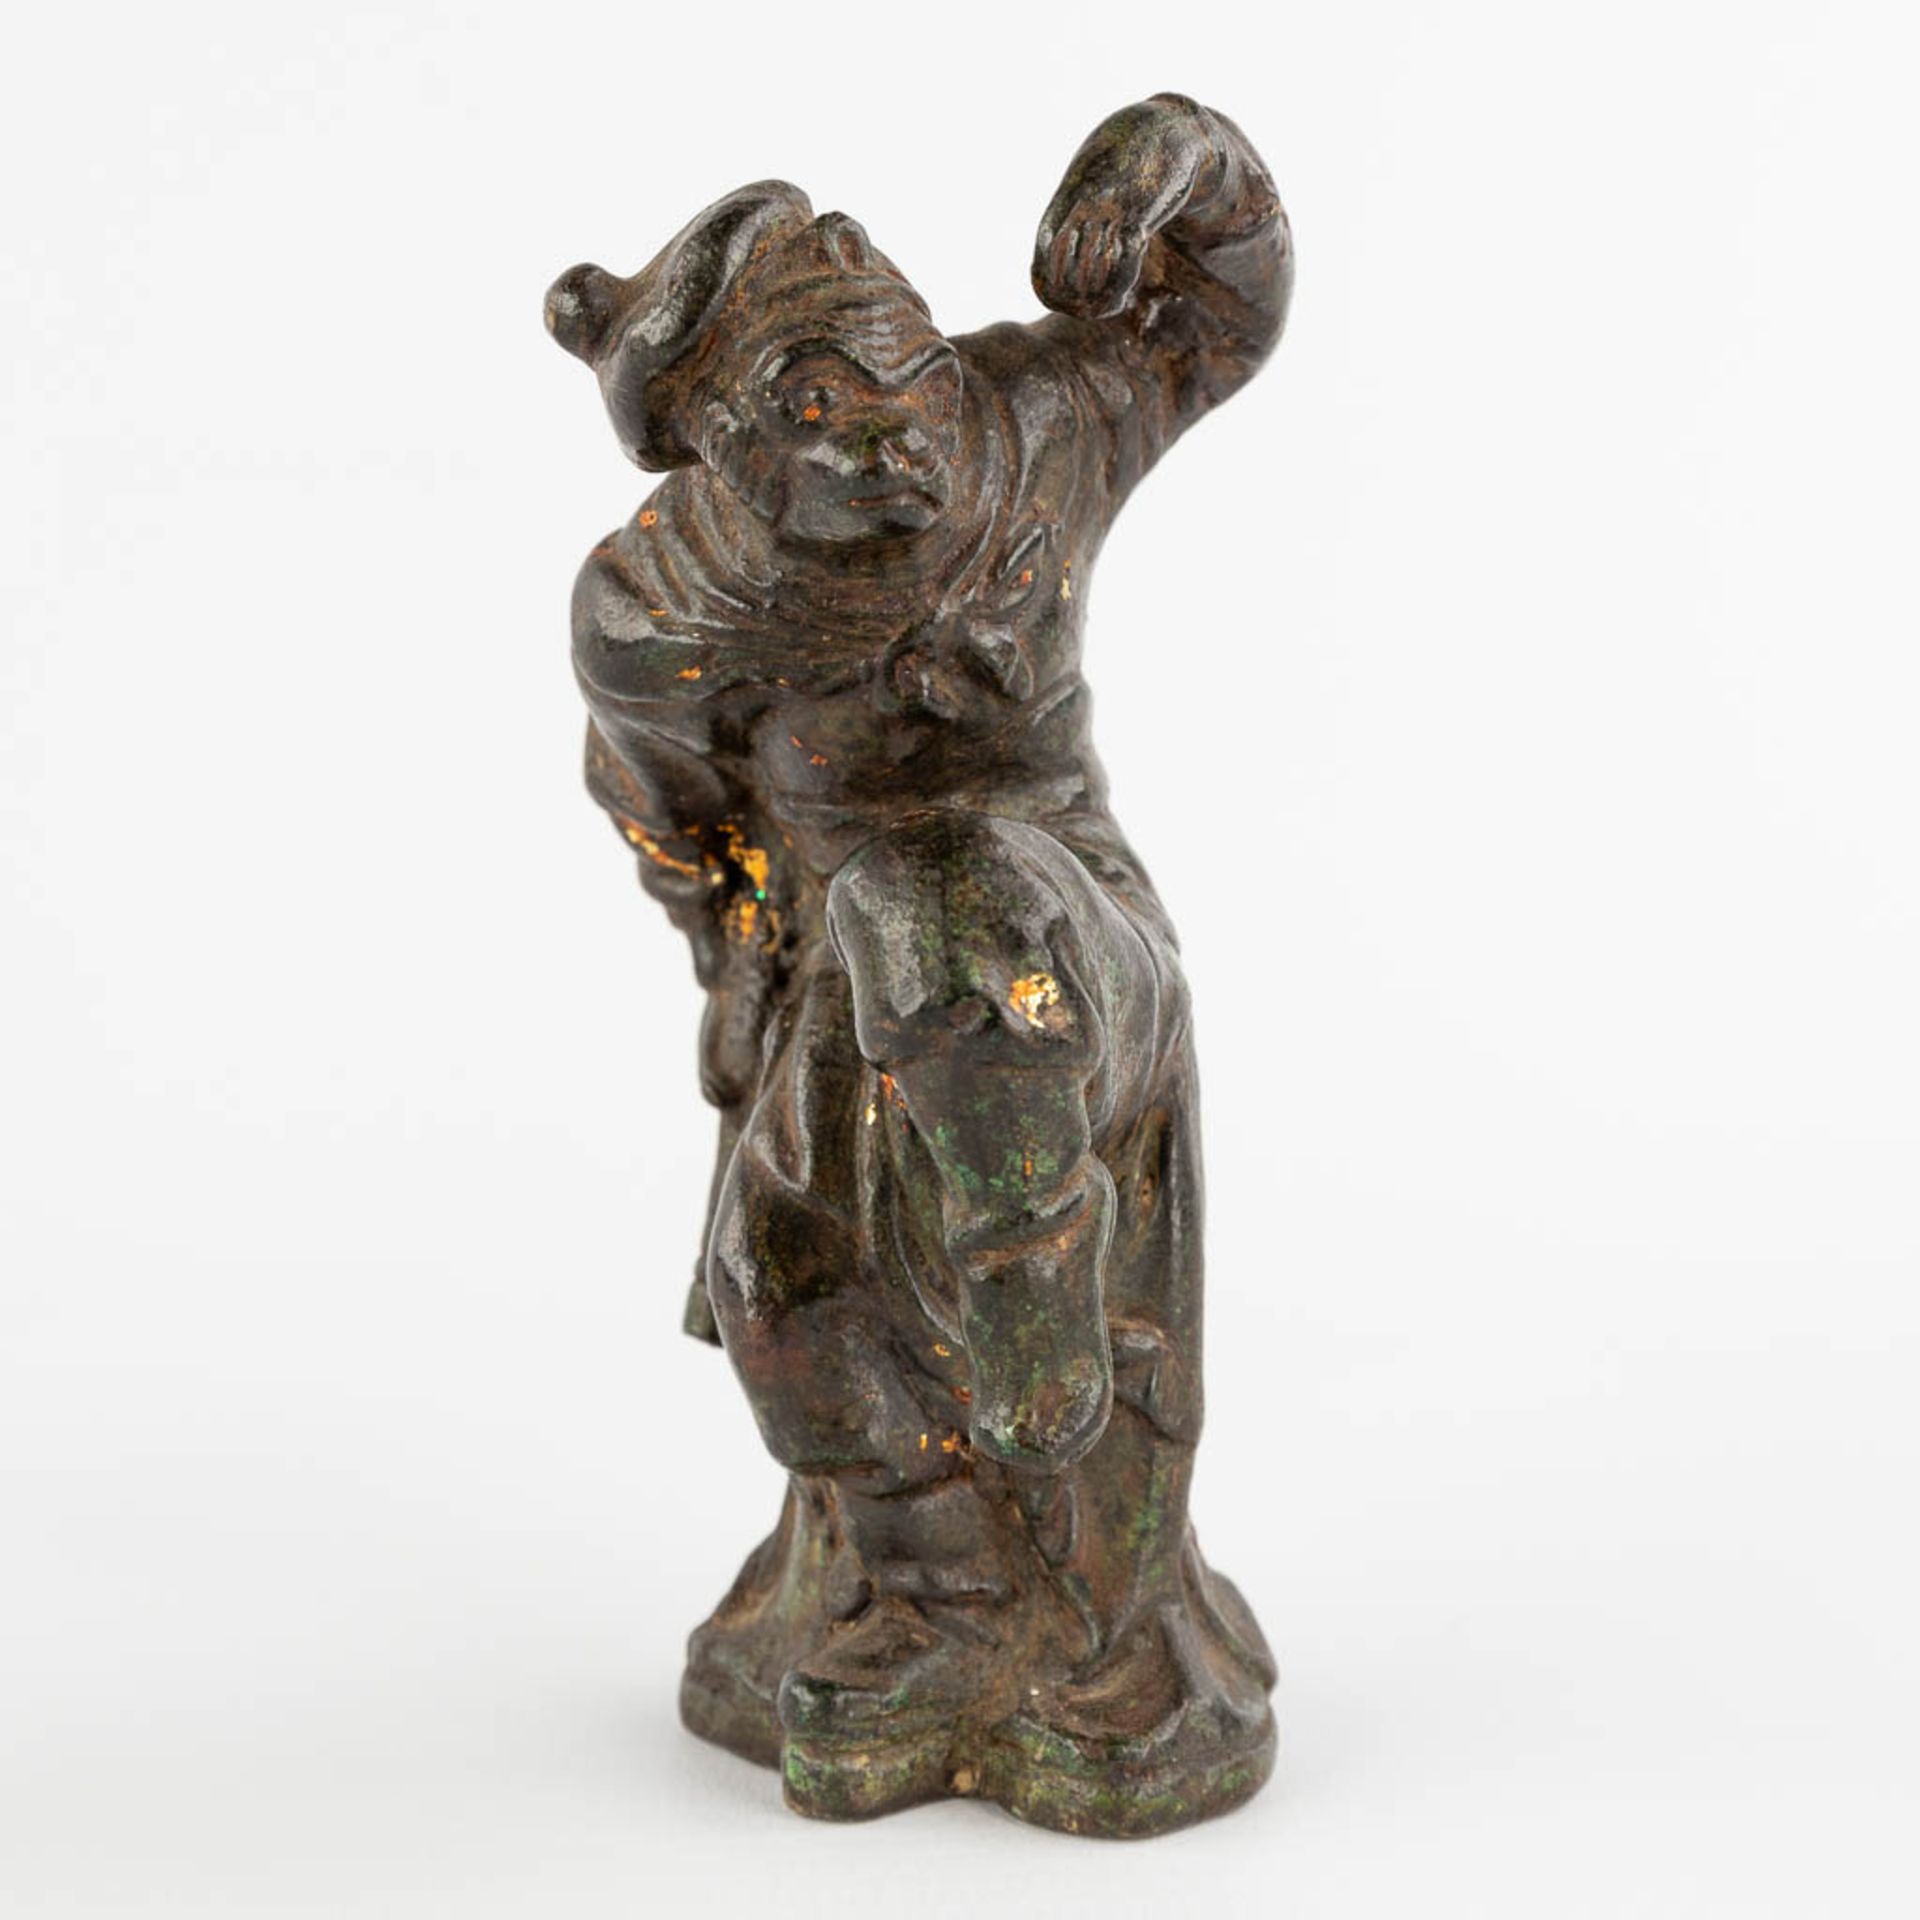 4 Chinese figurines, made of bronze. (L:7 x W:18 x H:18 cm) - Image 11 of 12